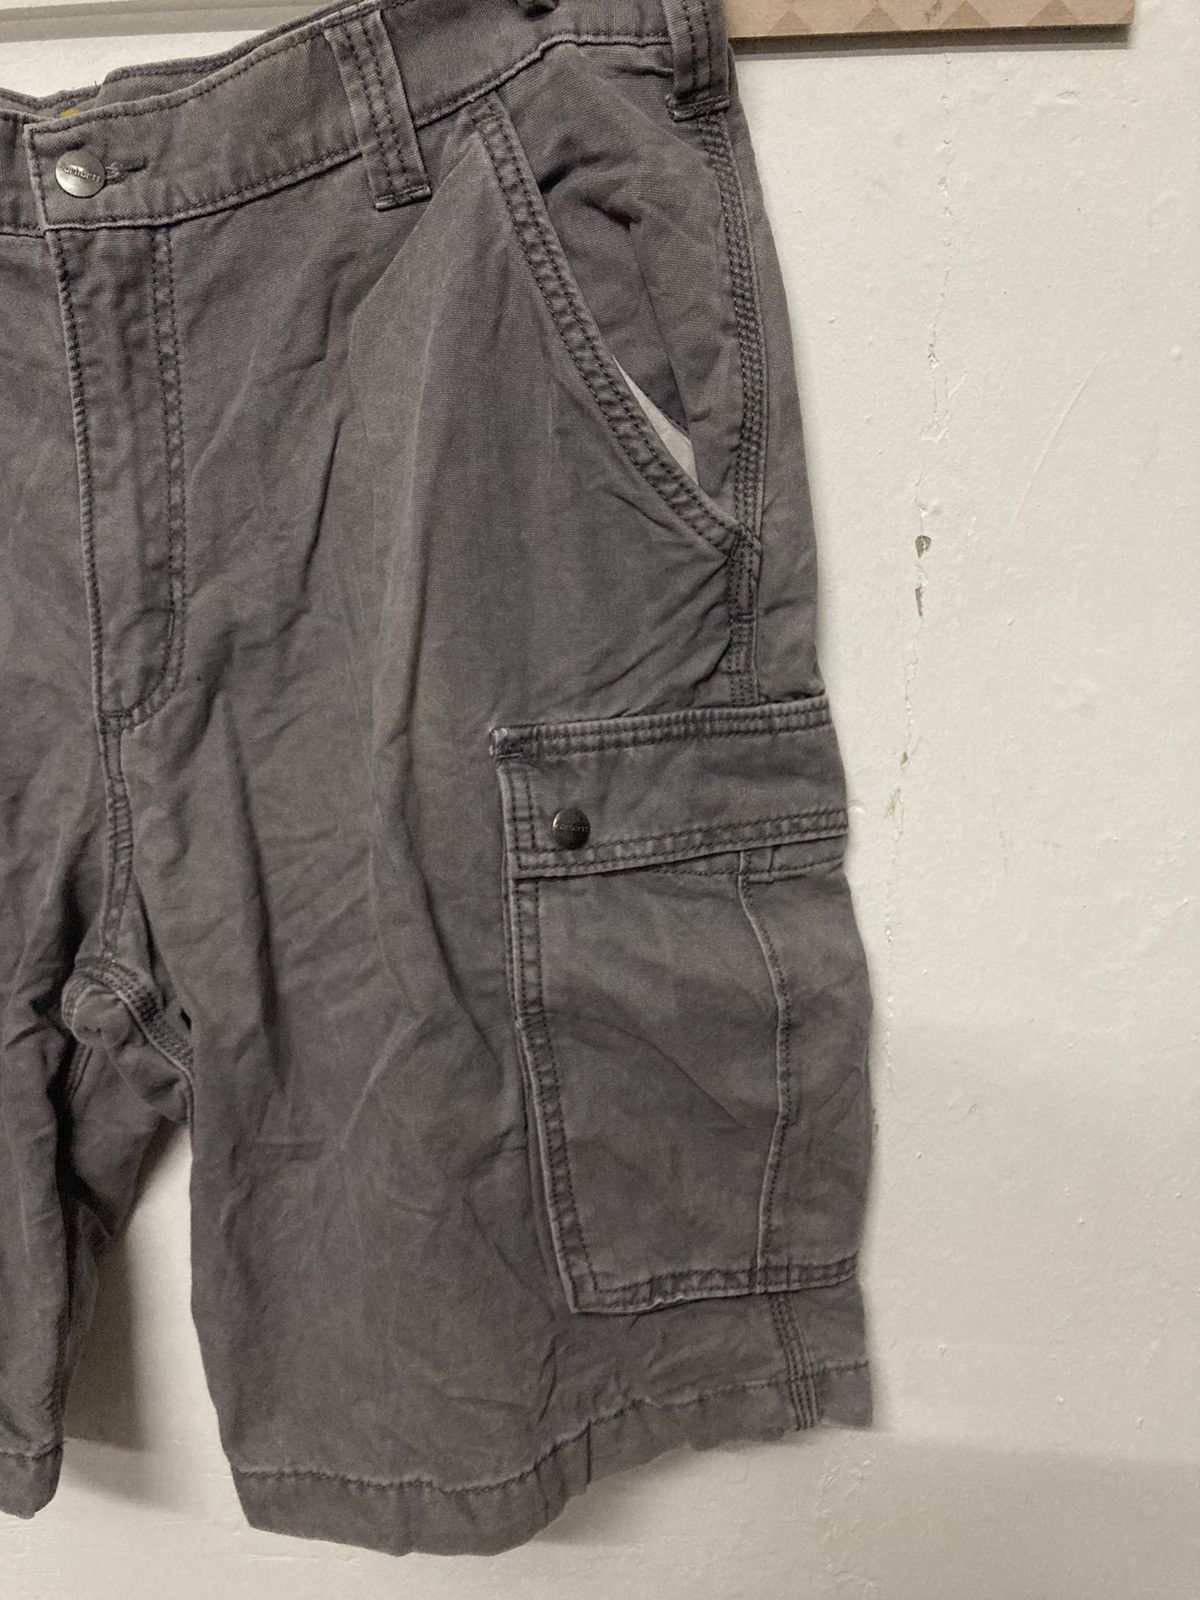 Vintage - Carhatt Relaxed Fit Cargo Short Pant Size 38 - 9